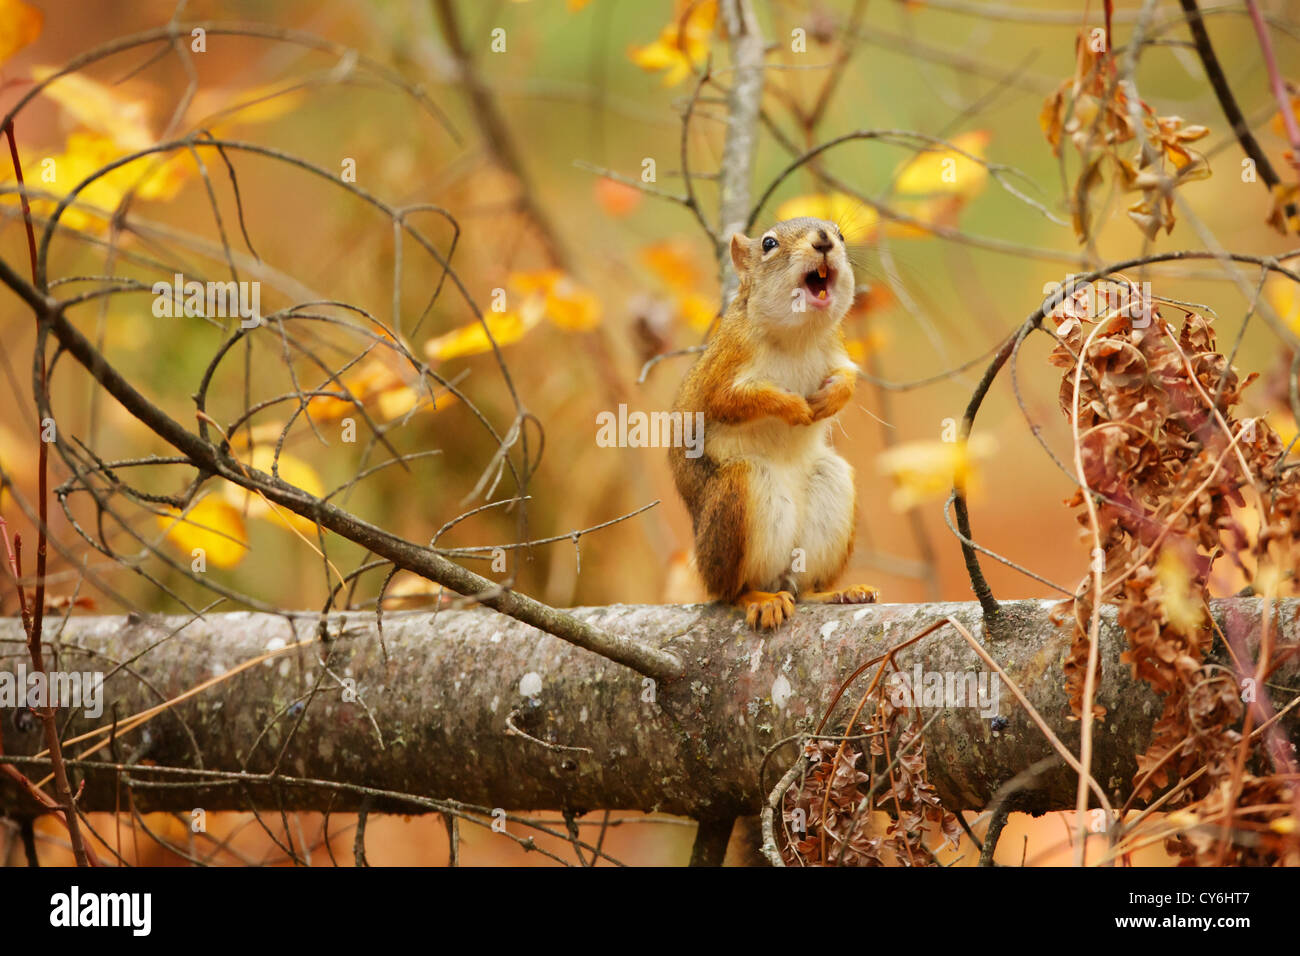 An annoyed squirrel hurls profanity at the photographer. Stock Photo